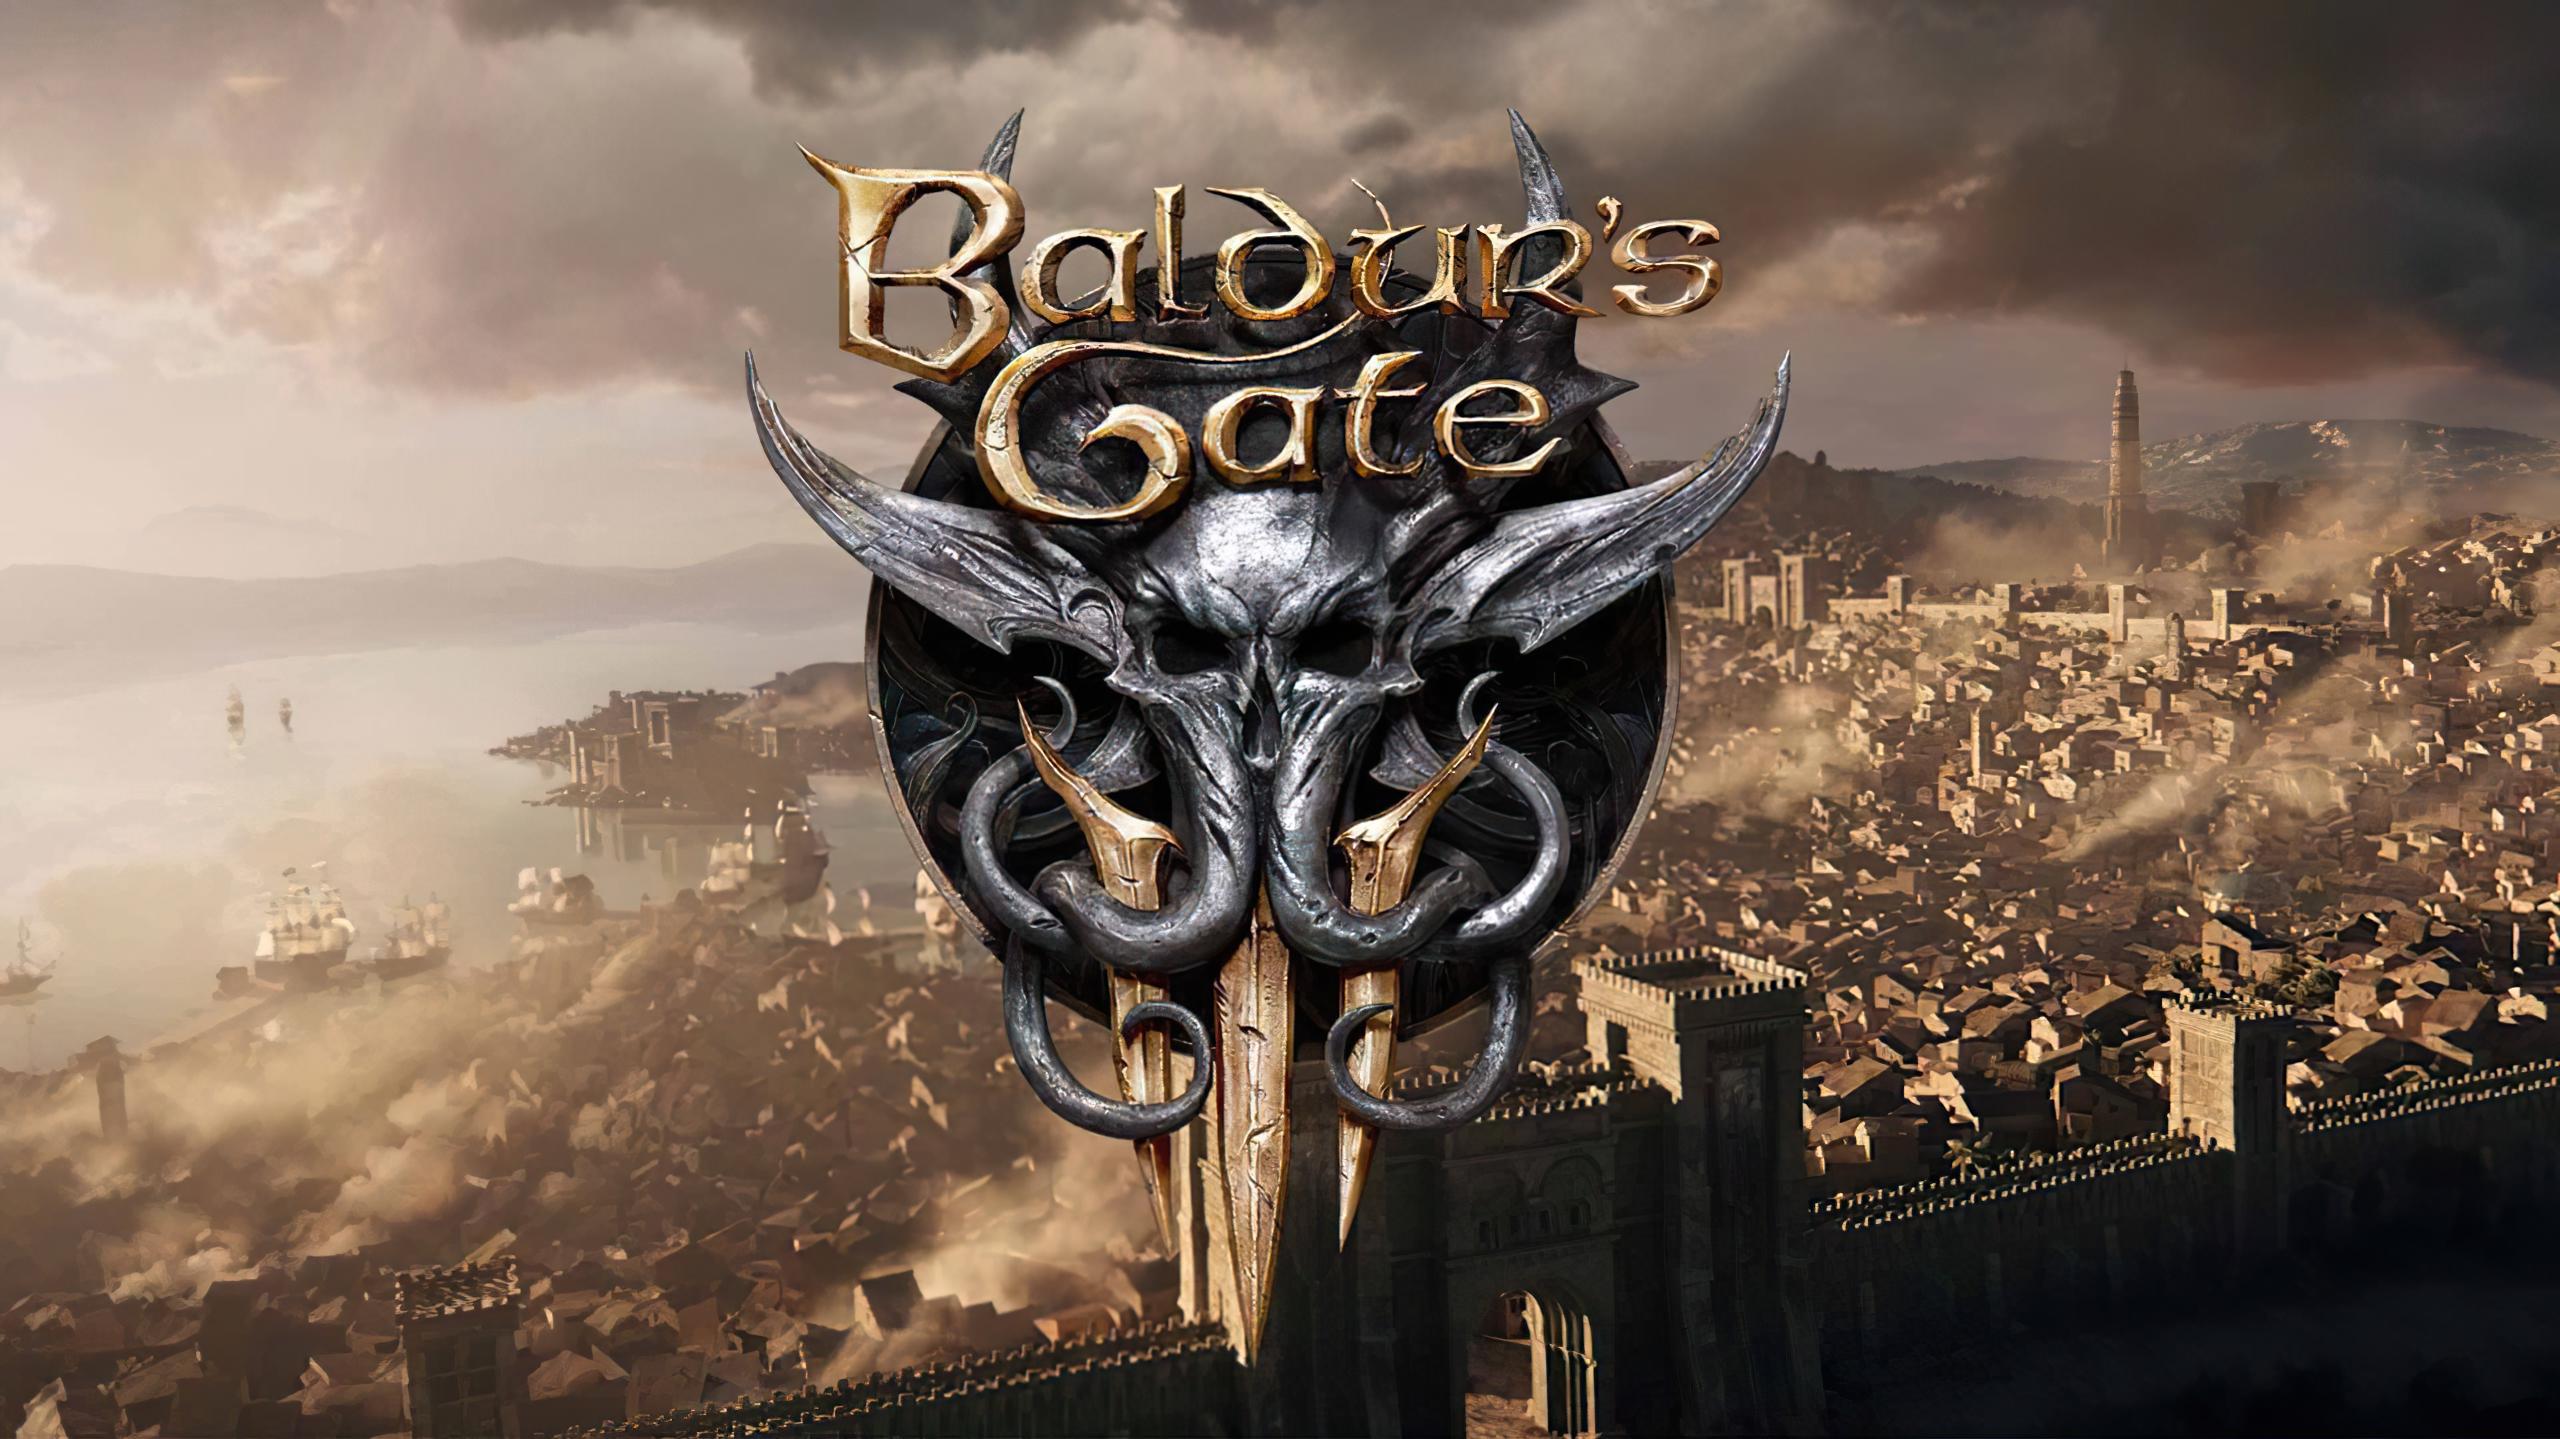 Baldurs Gate 3 is Currently the Highest Rated PC Game to Date on